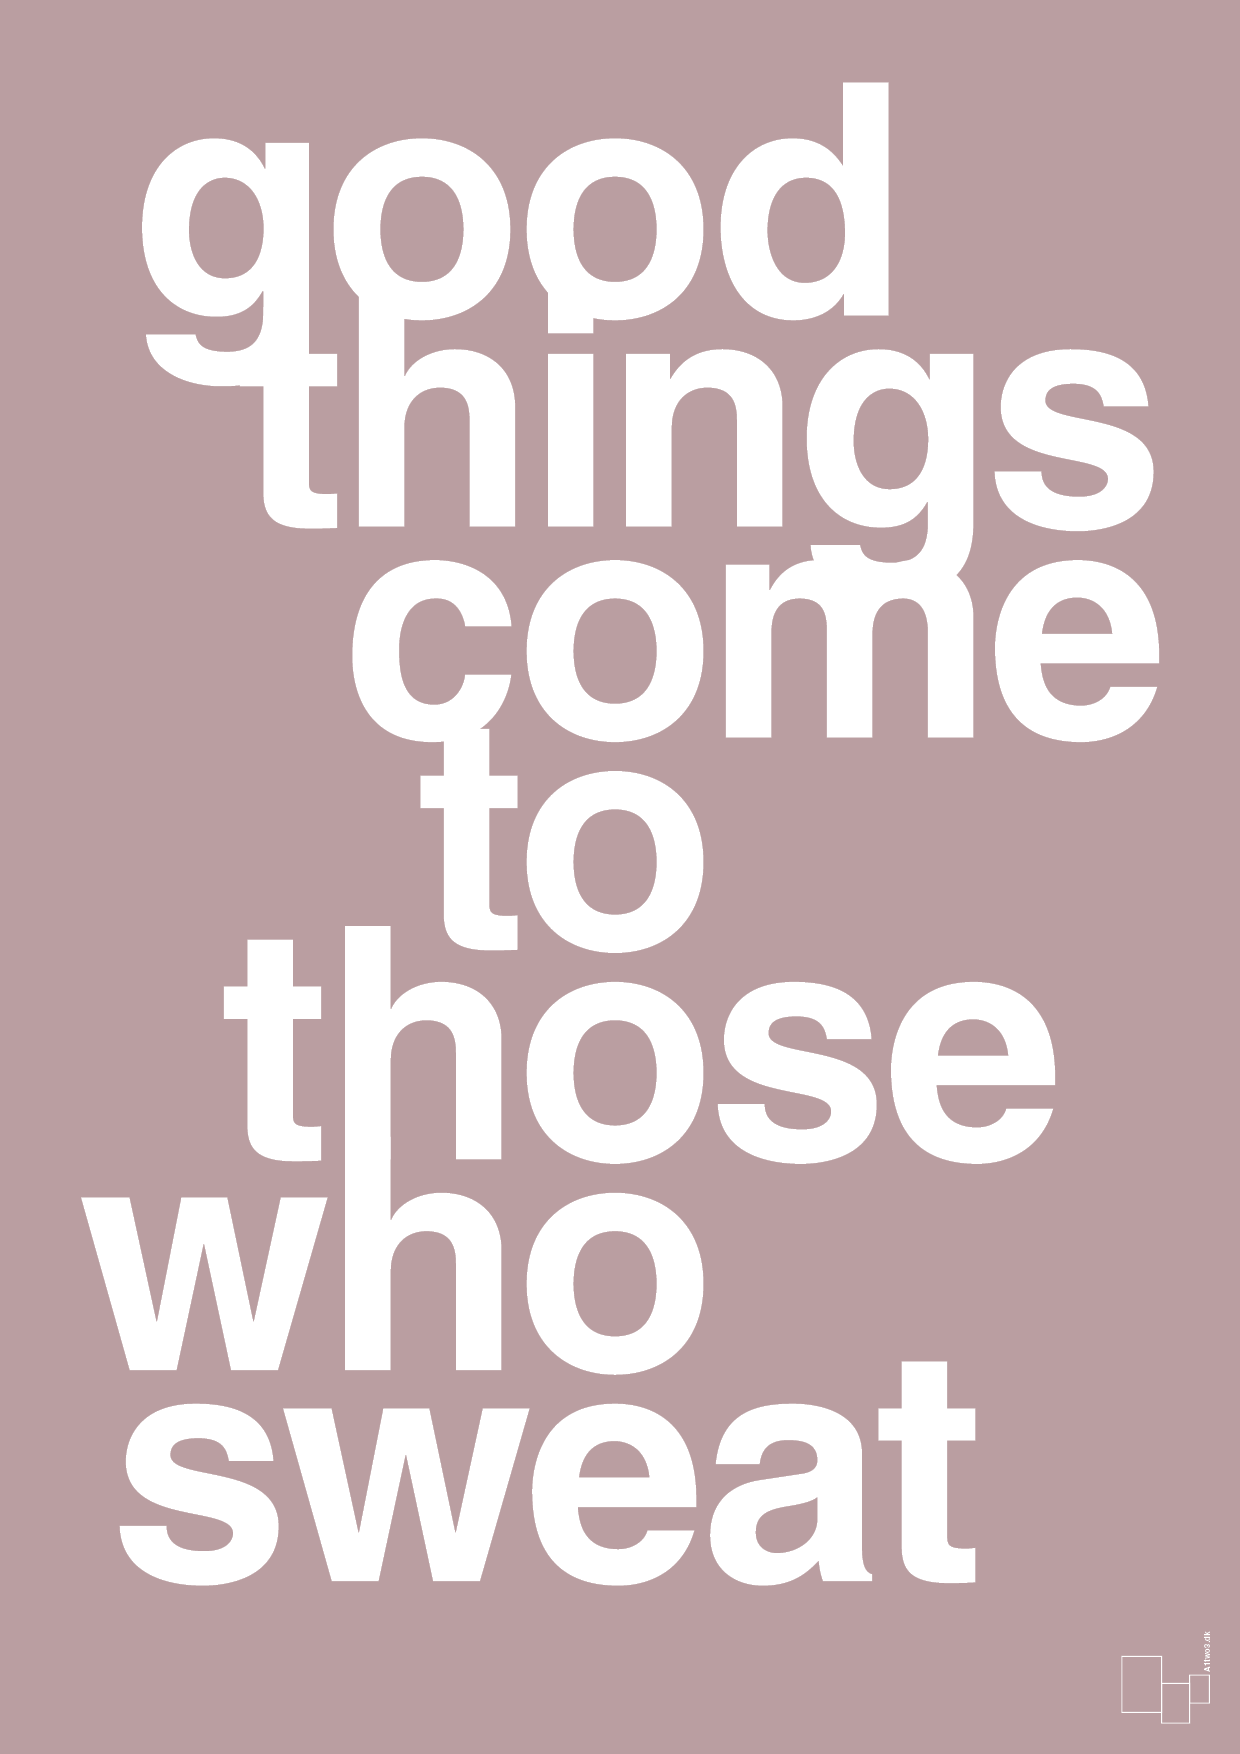 good things come to those who sweat - Plakat med Sport & Fritid i Light Rose